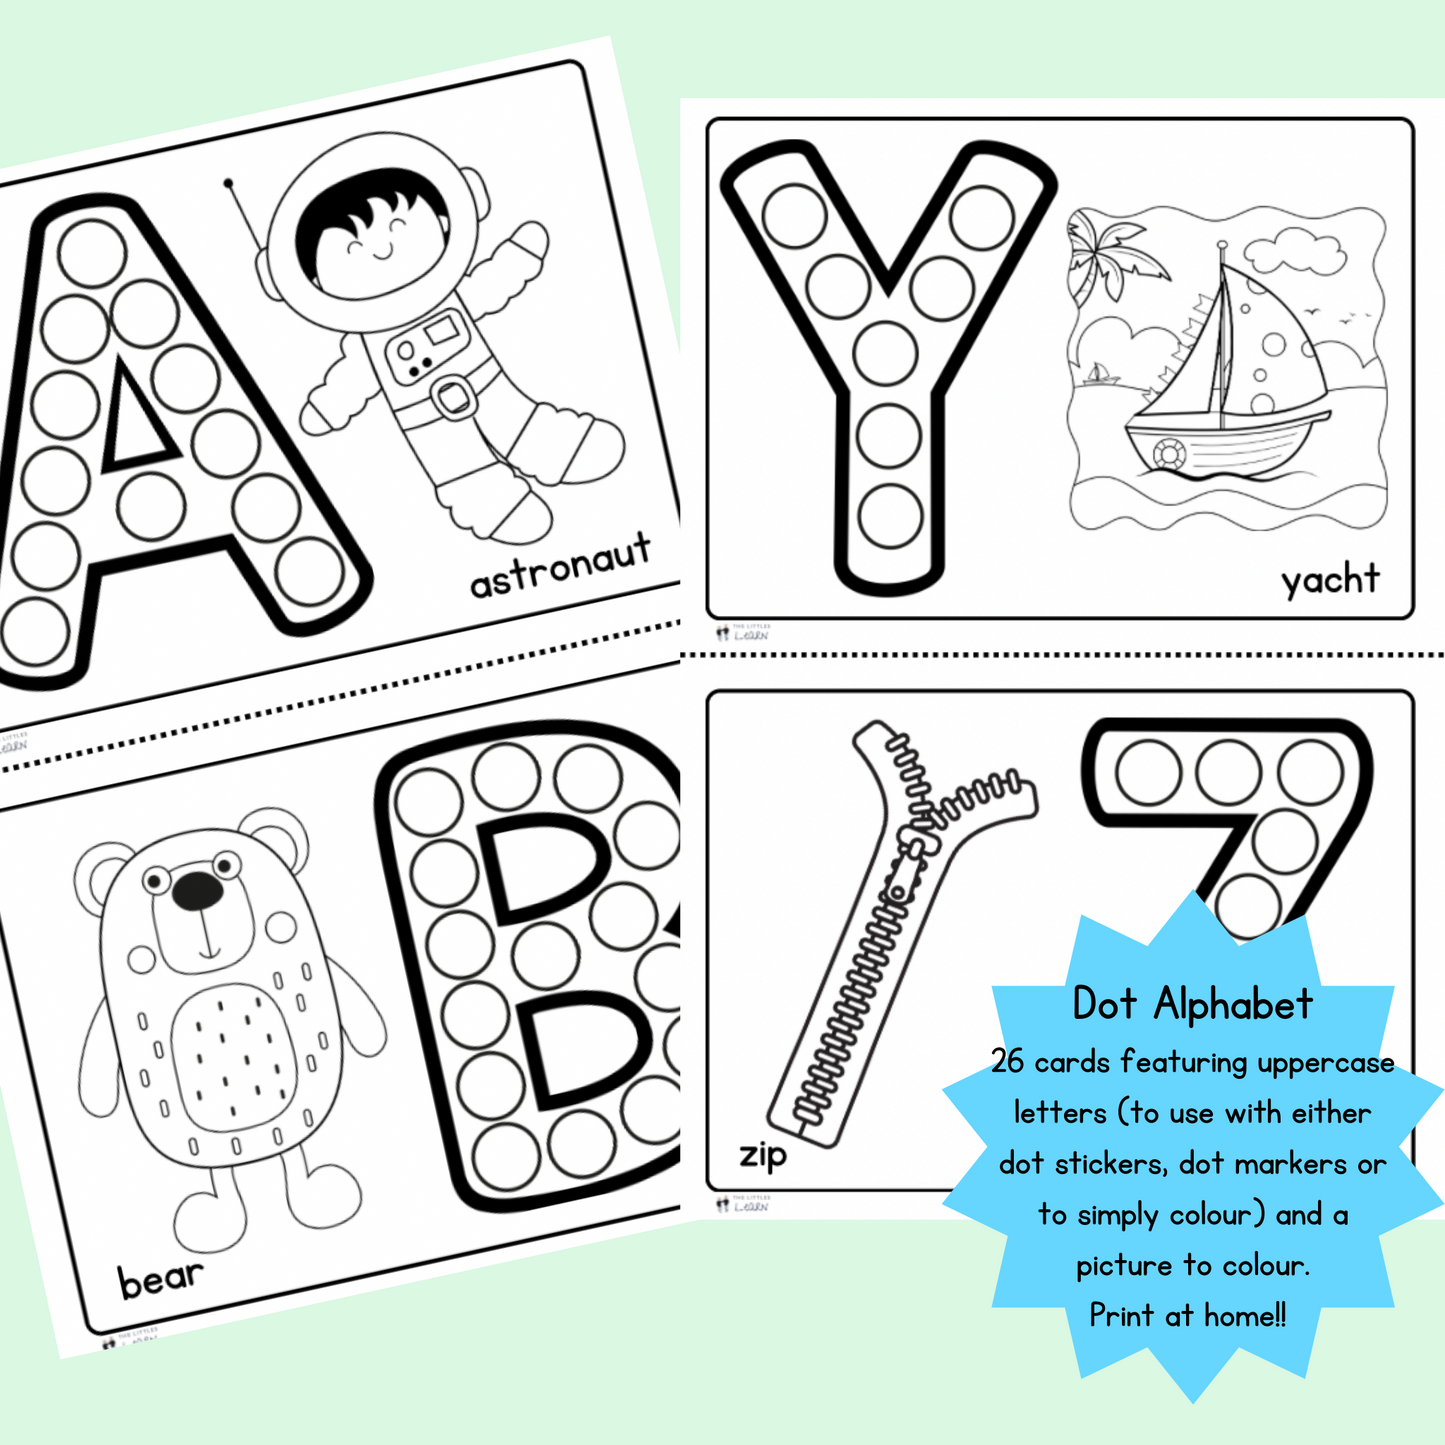 Cards for each letter of the alphabet featuring a large bold uppercase letter with circles inside to add either dot stickers or dot markers to help learn alphabet. Next to each letter is a picture to colour of something beginning with that letter.